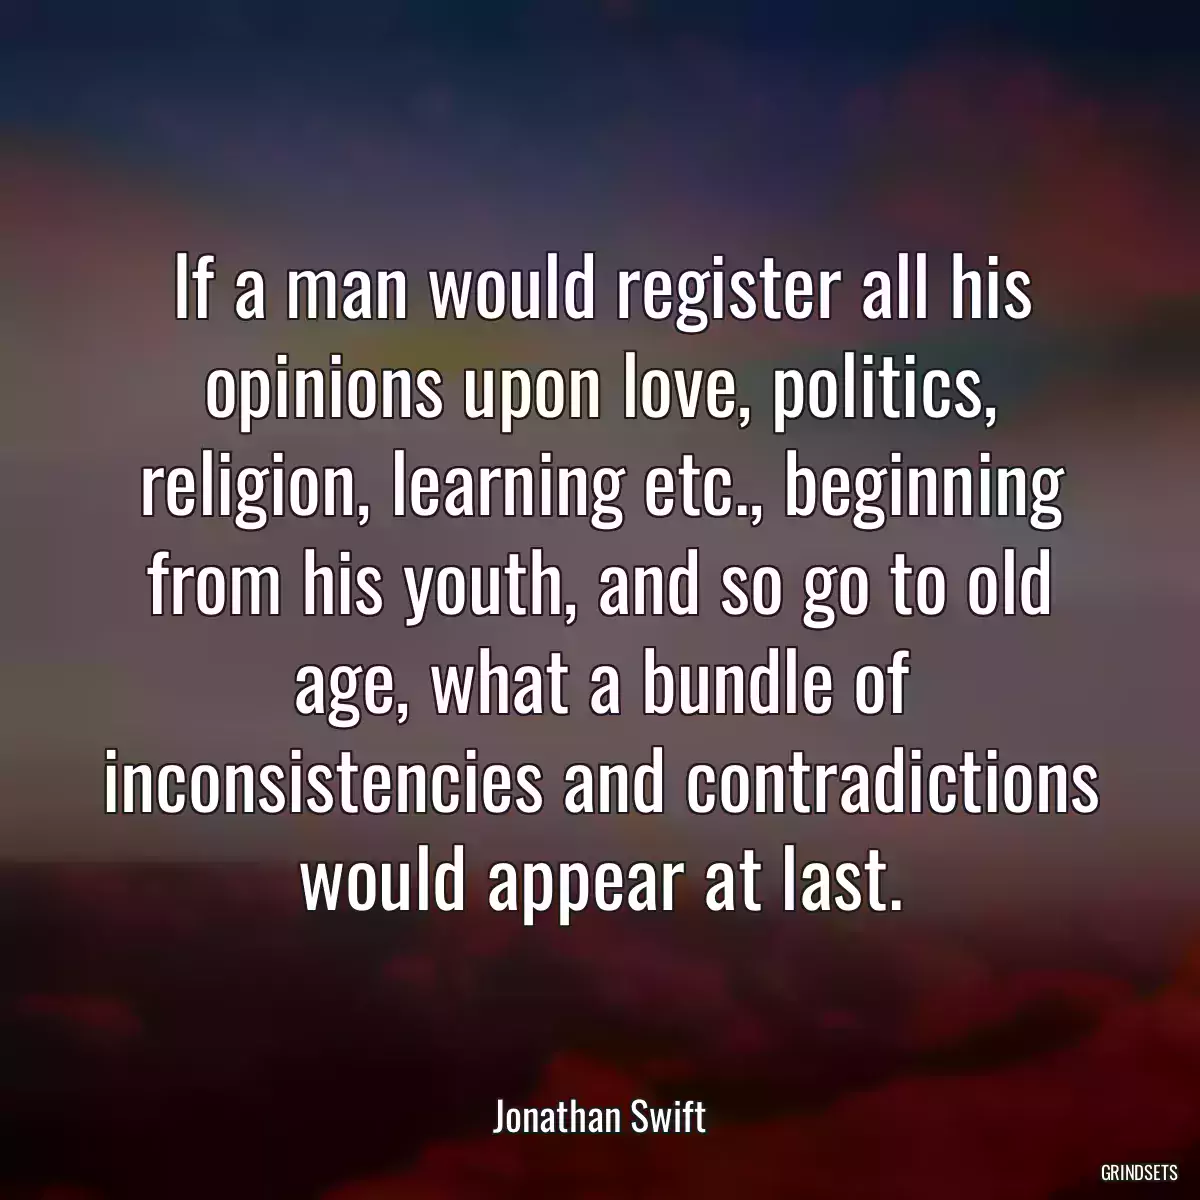 If a man would register all his opinions upon love, politics, religion, learning etc., beginning from his youth, and so go to old age, what a bundle of inconsistencies and contradictions would appear at last.